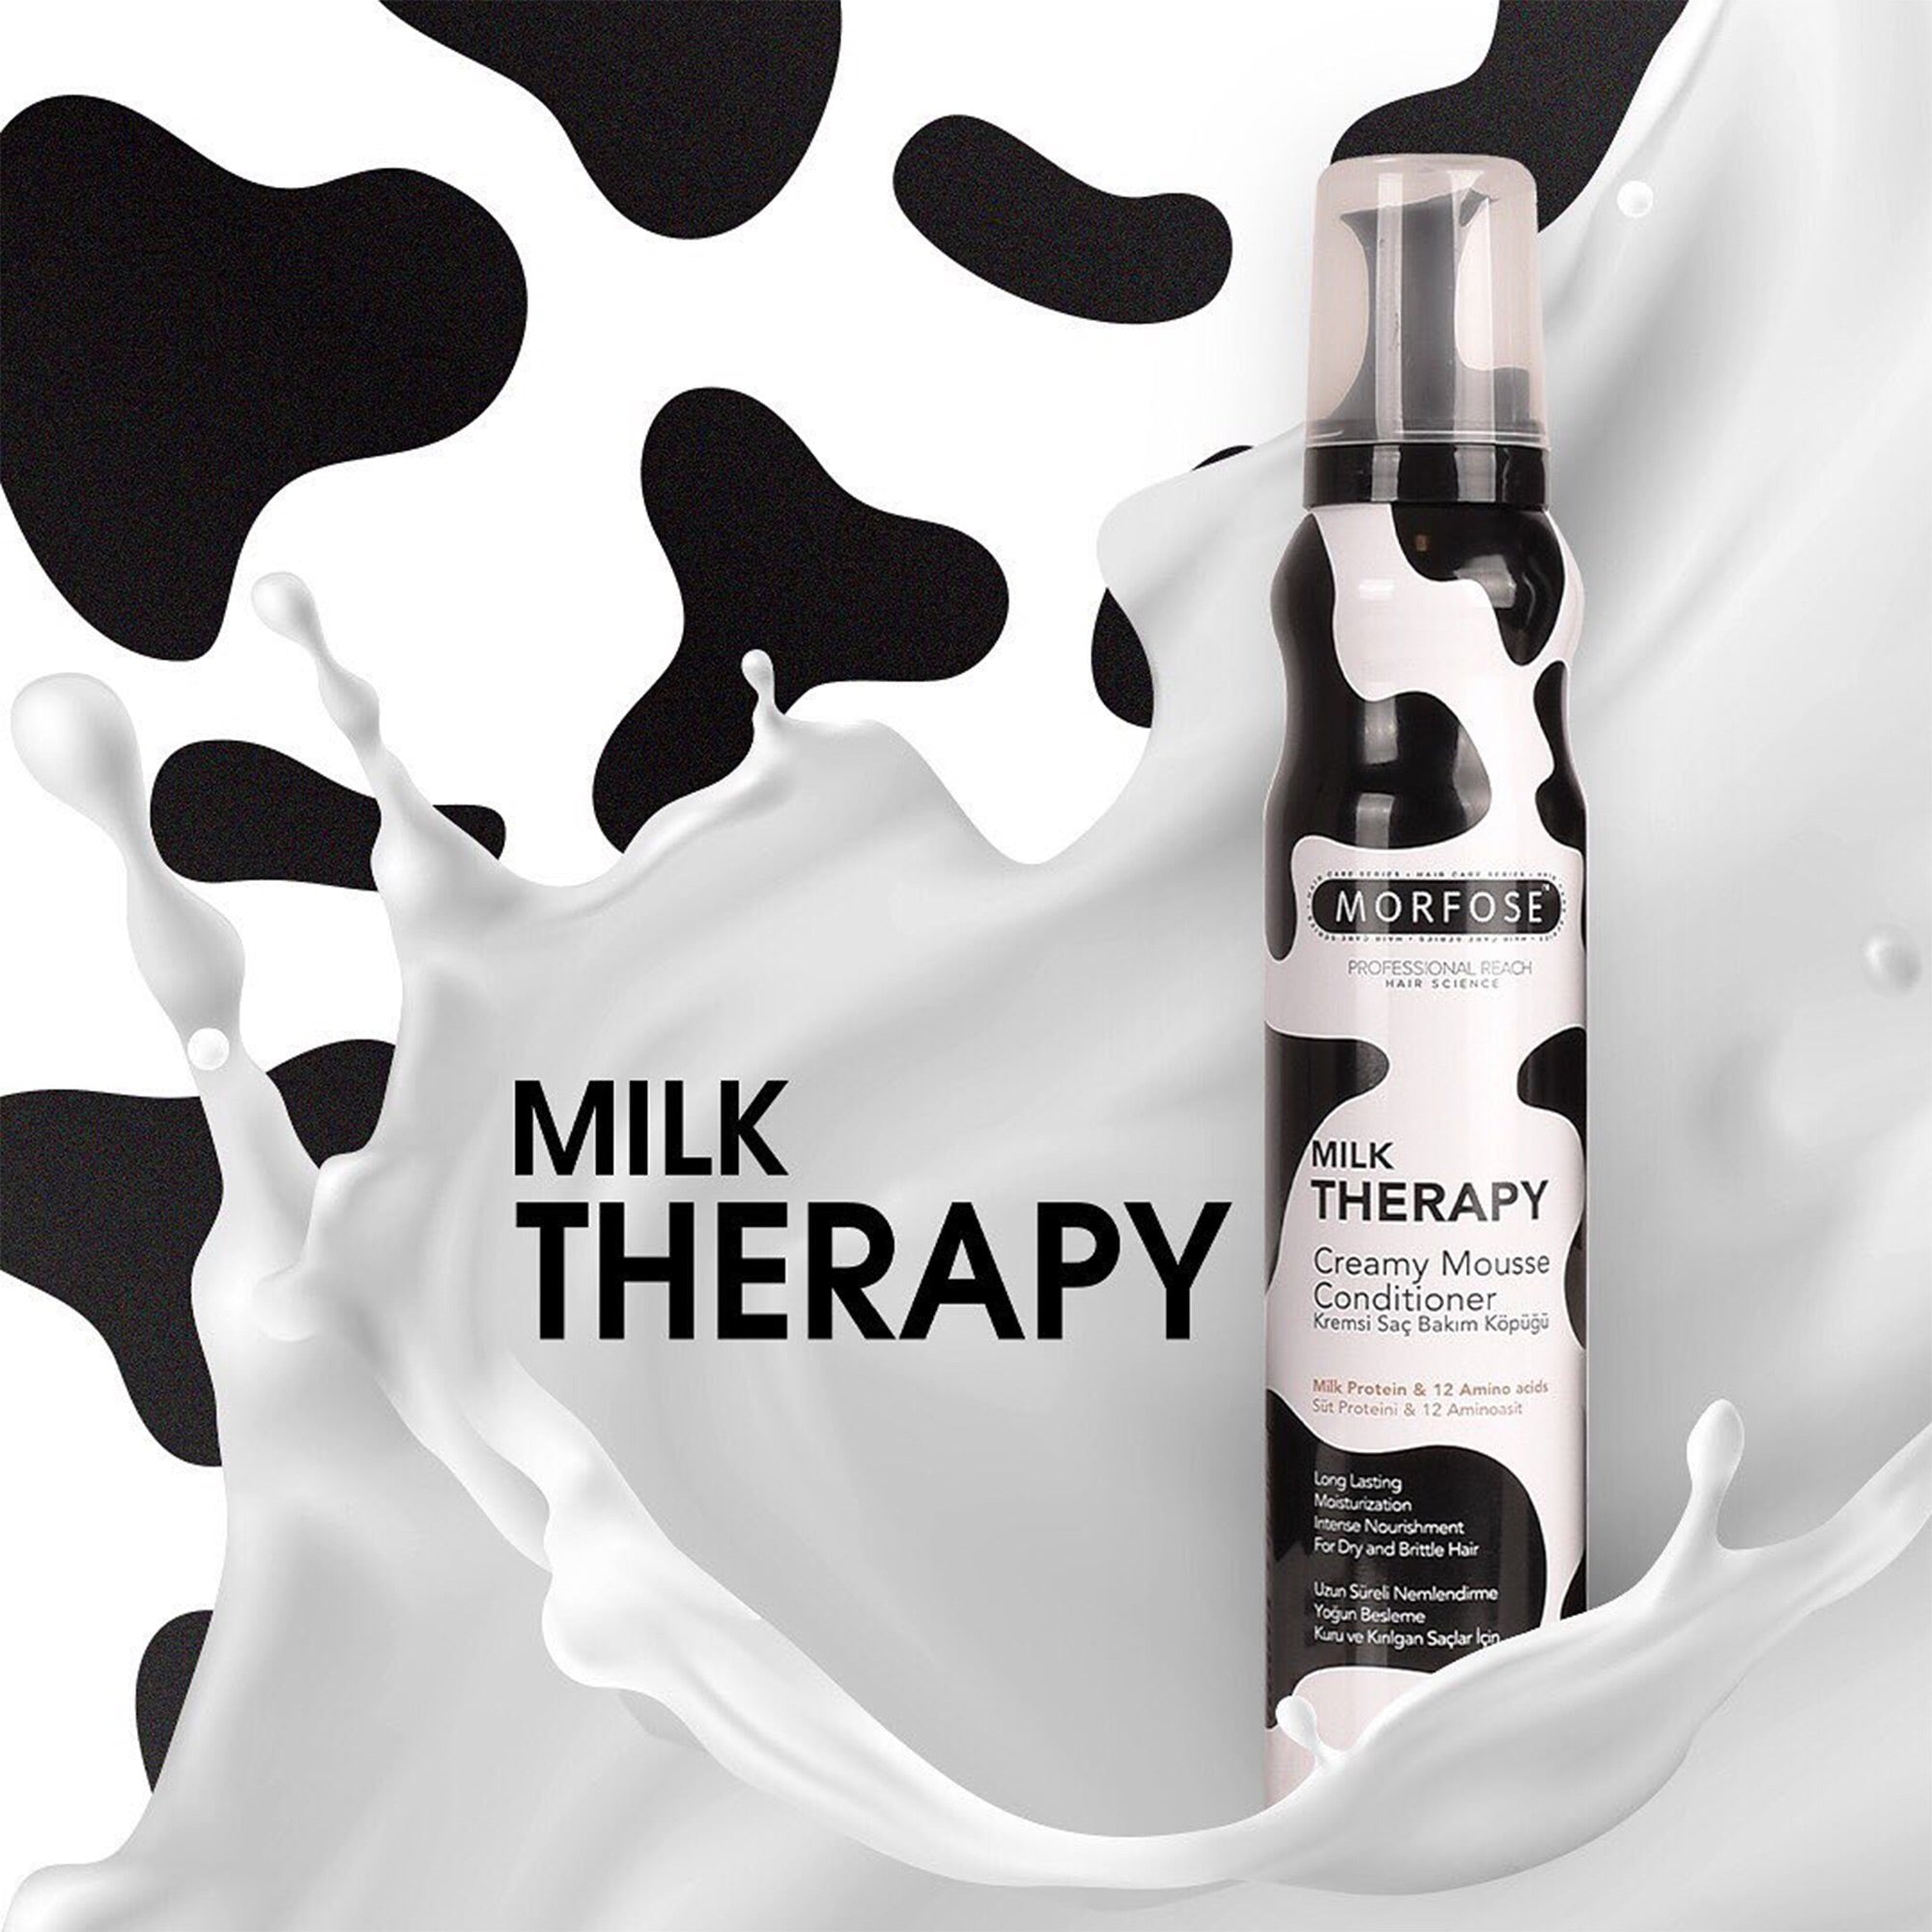 Morfose - Milk Therapy Creamy Mousse Conditioner 200ml